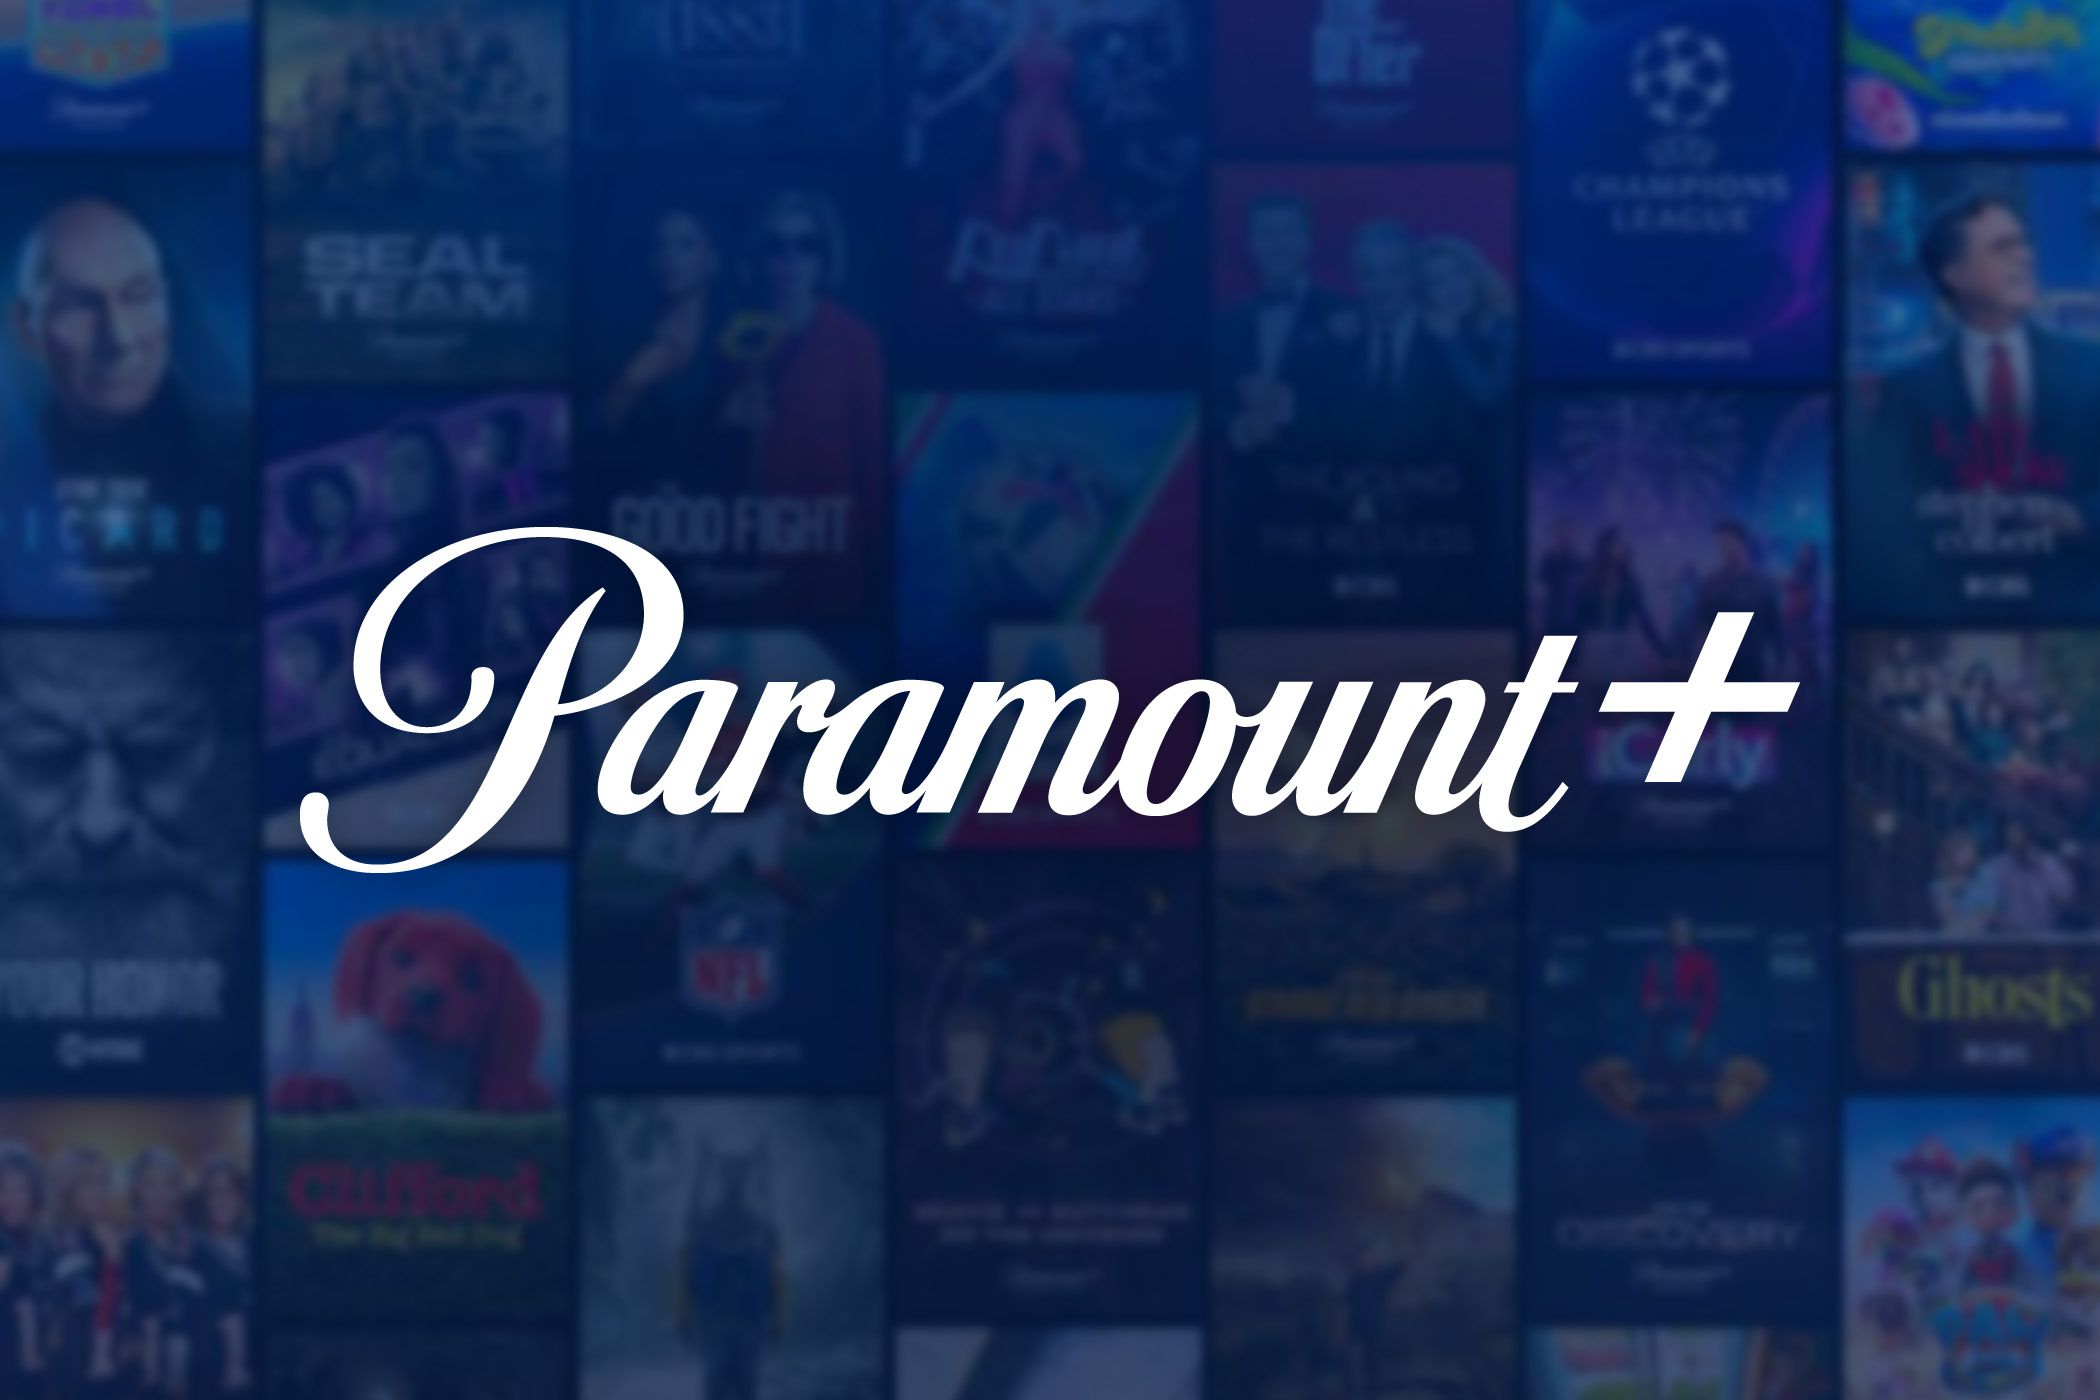 Paramount Plus annual plans are 50% off for Cyber Monday